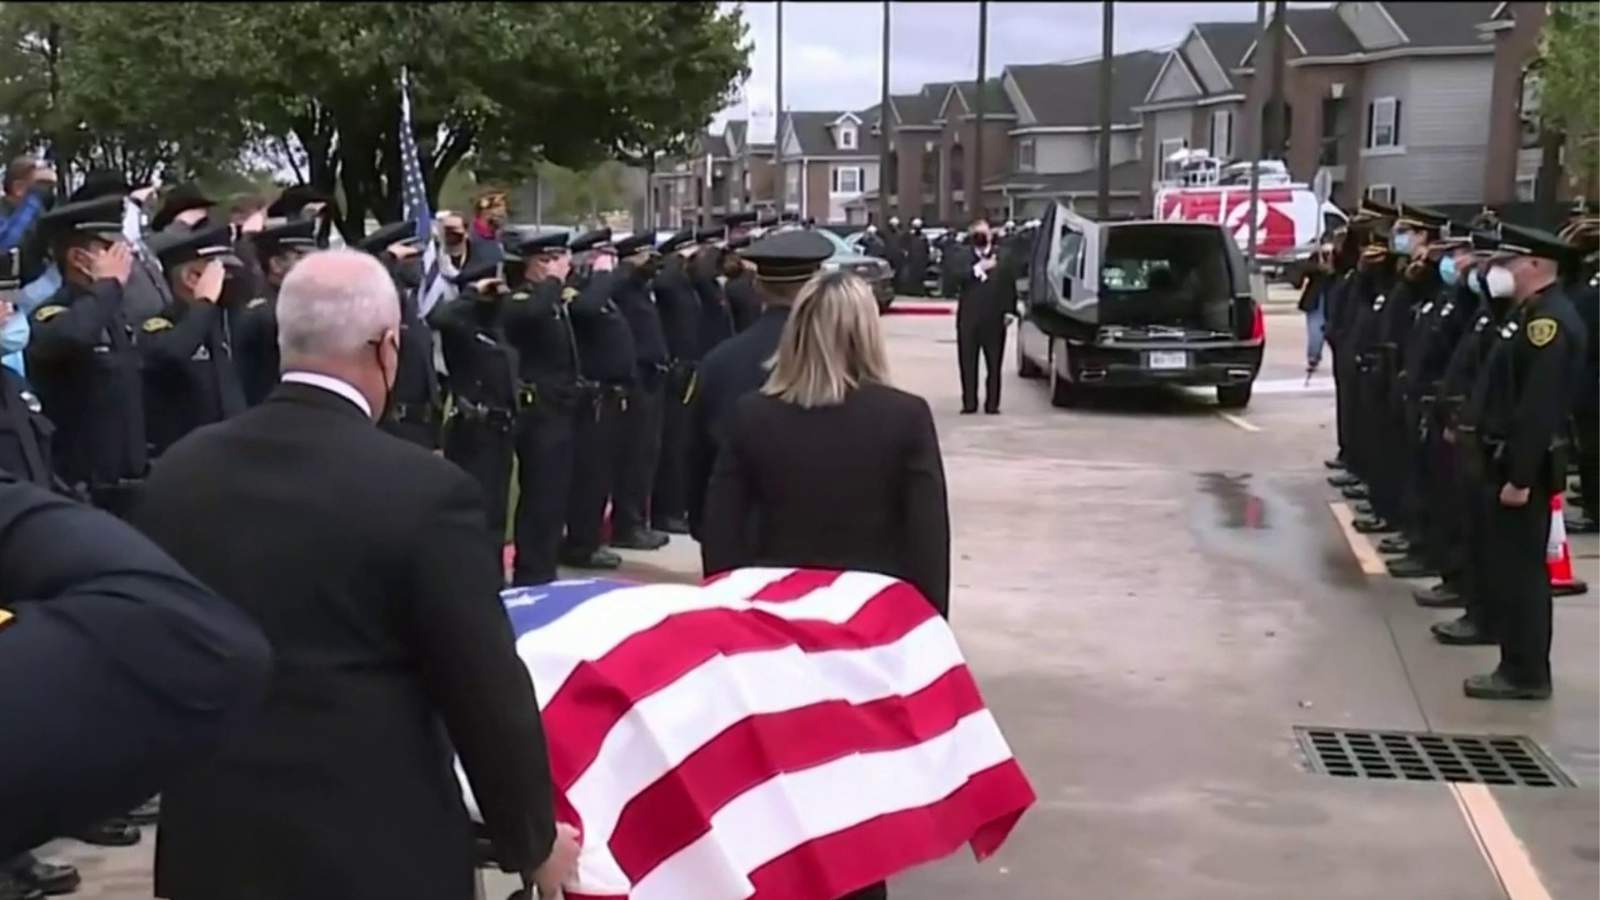 WATCH: HPD escorts body of senior police officer who died from COVID-19 after weeks-long battle